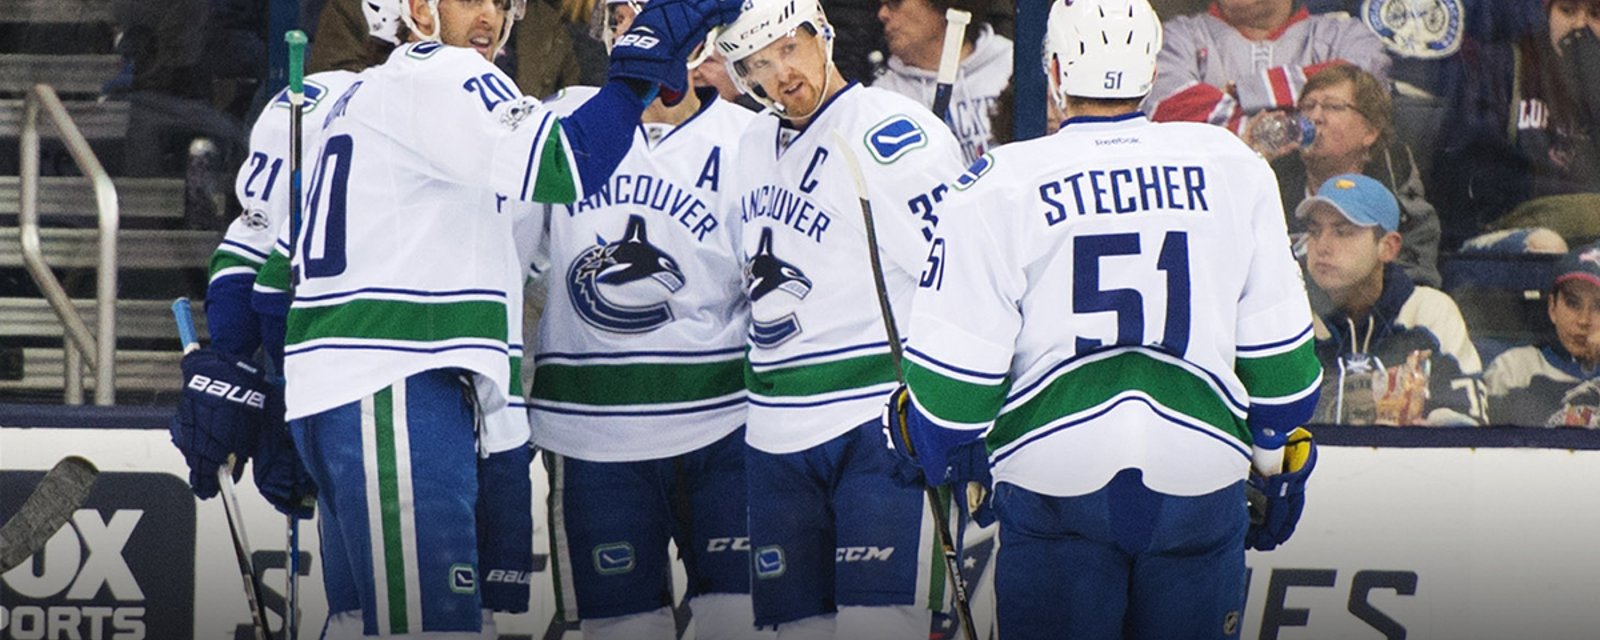 Report: Canucks fans lash out at team for offseason moves